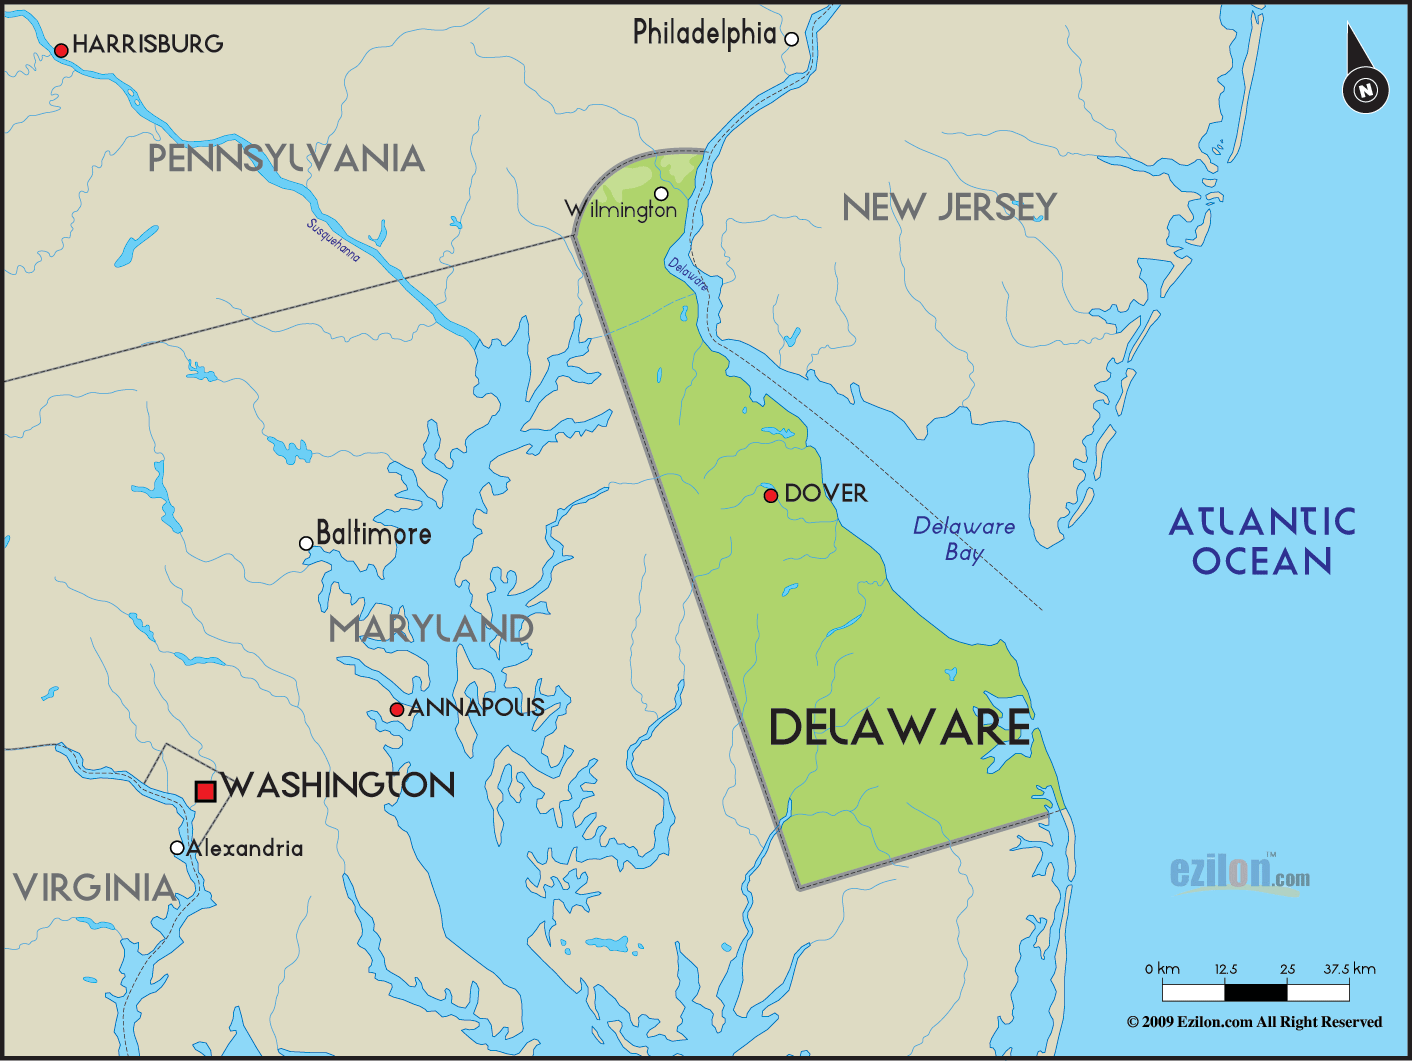 Geographical Map Of Delaware And Delaware Geographical Maps